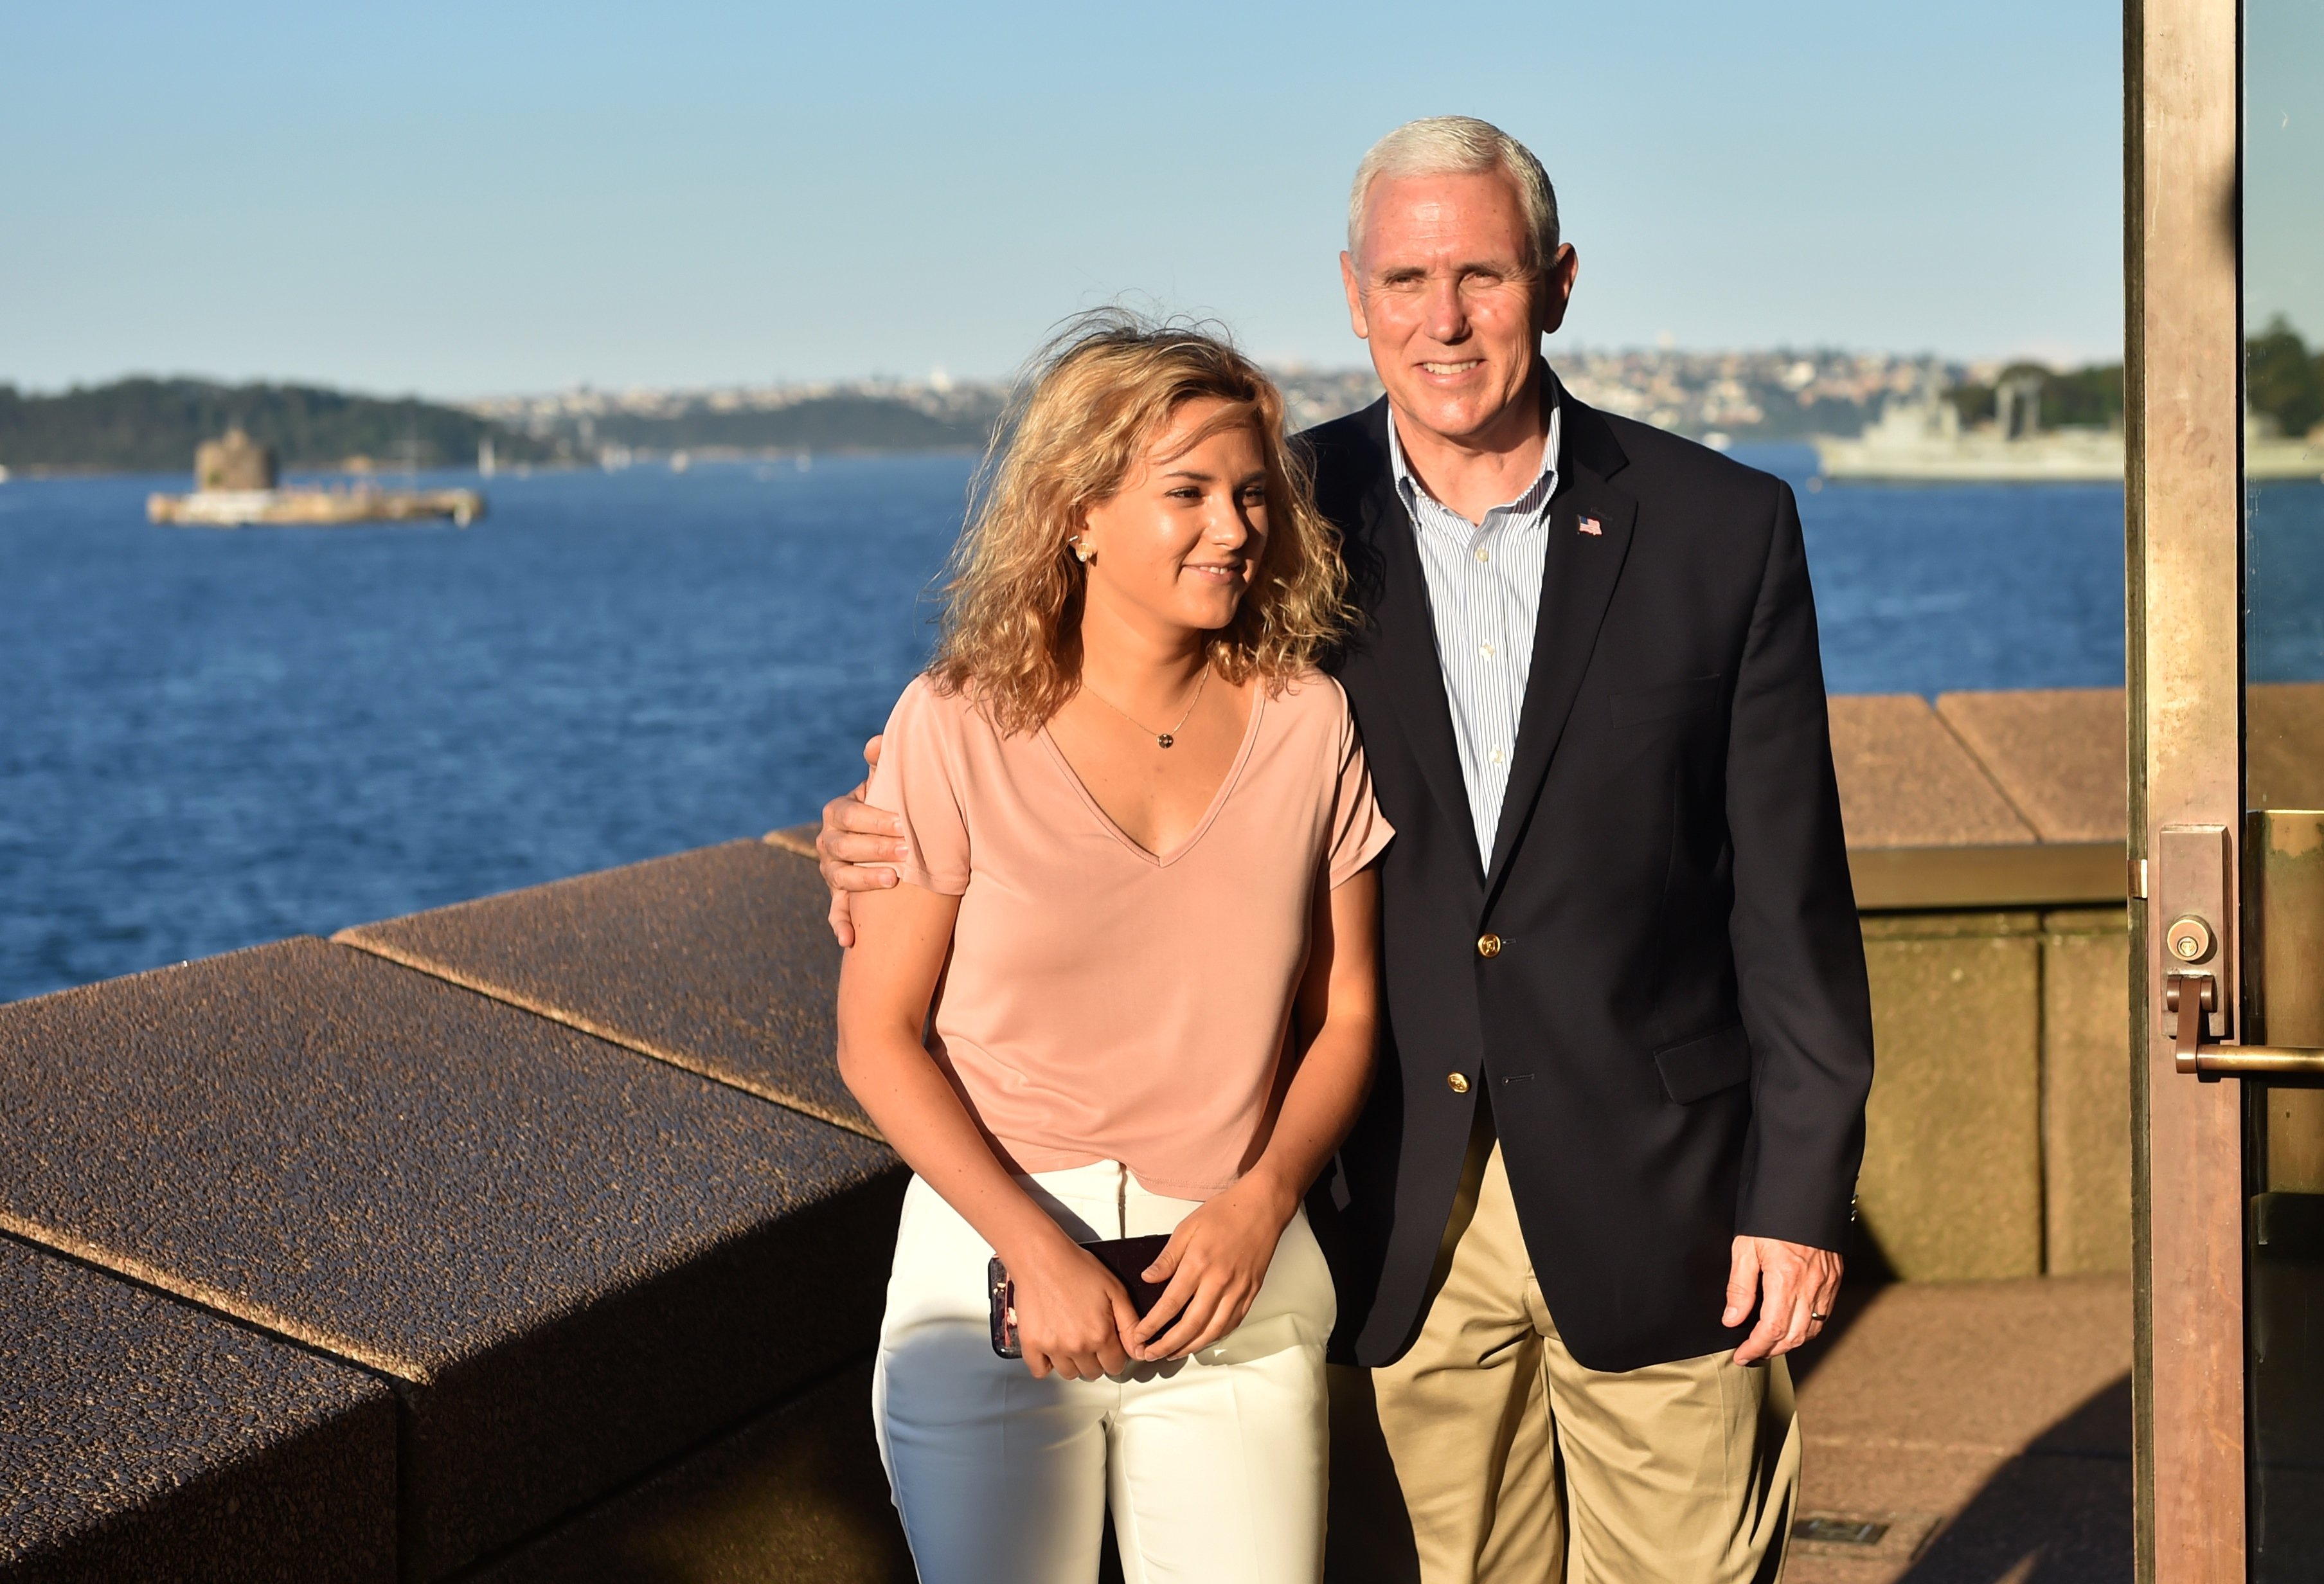 U.S. Vice President Mike Pence (R) visits the Opera House with his daughter Charlotte on April 23, 2017, in Sydney, Australia. Source: Getty Images.